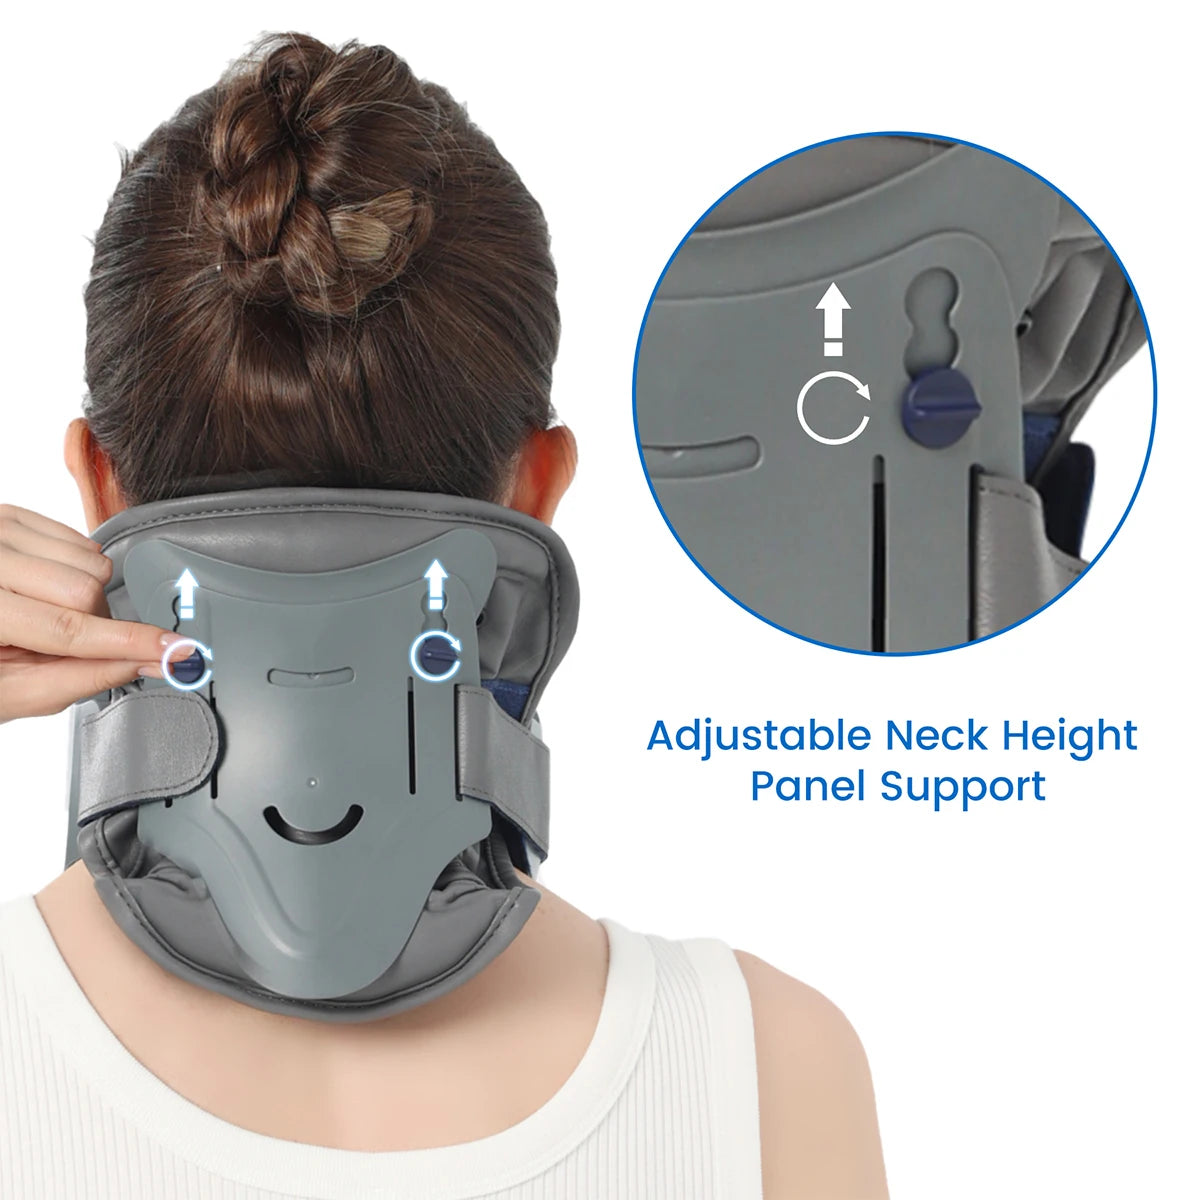 VELPEAU Neck Traction Device Inflatable for Neck Pain and Stretch Care Neck Stretcher Cervical Posture Corrector Adjustable